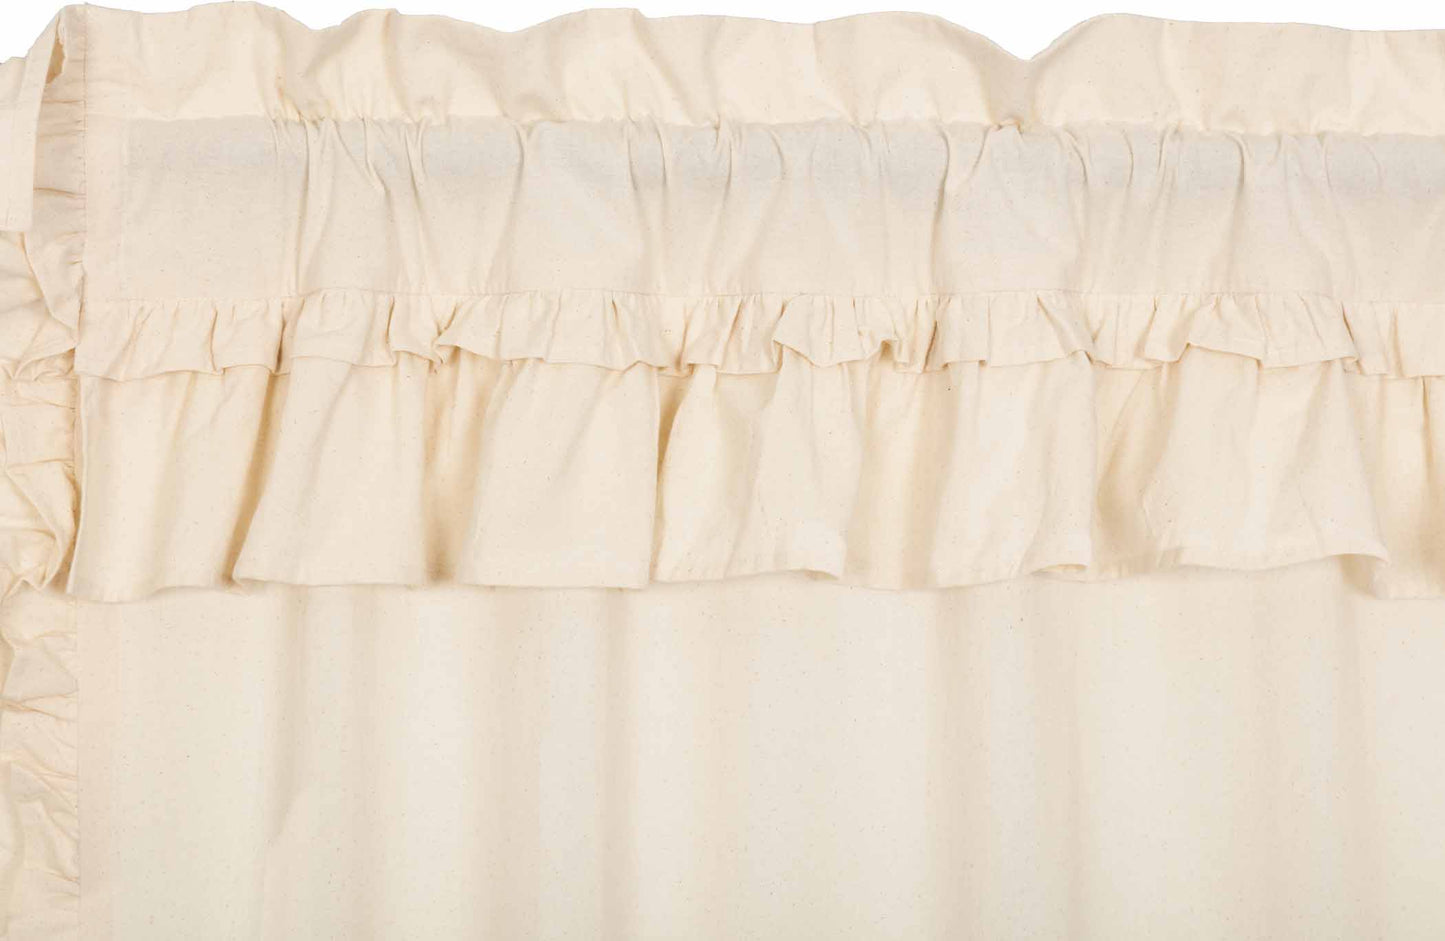 51992-Muslin-Ruffled-Unbleached-Natural-Valance-16x72-image-7